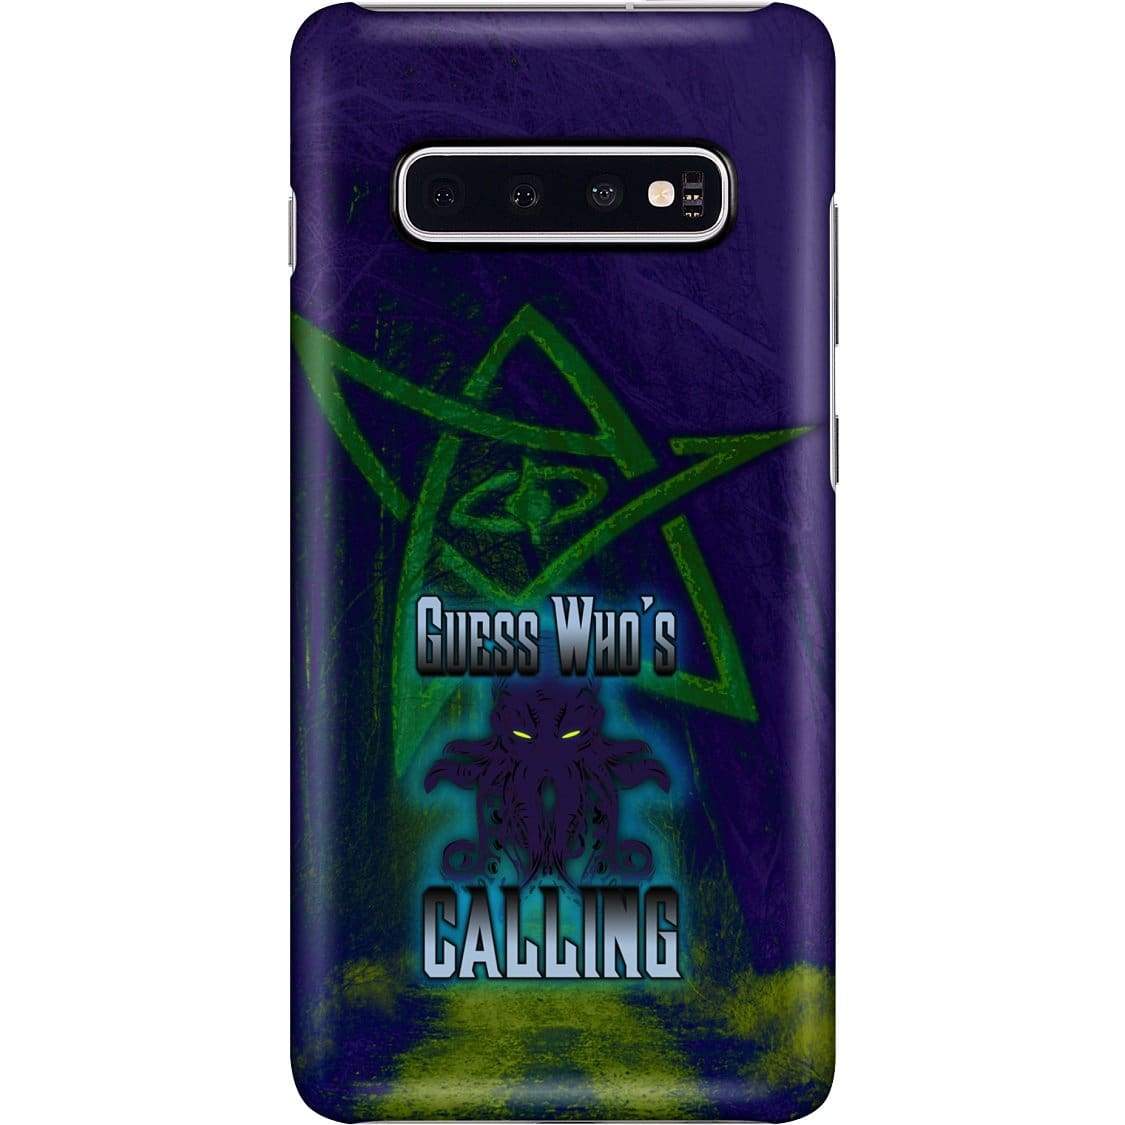 Cthulhu - Guess Who’s Calling Phone Case - Snap * iPhone * Samsung * - Samsung Galaxy S10 Plus Case / Gloss / Apparel